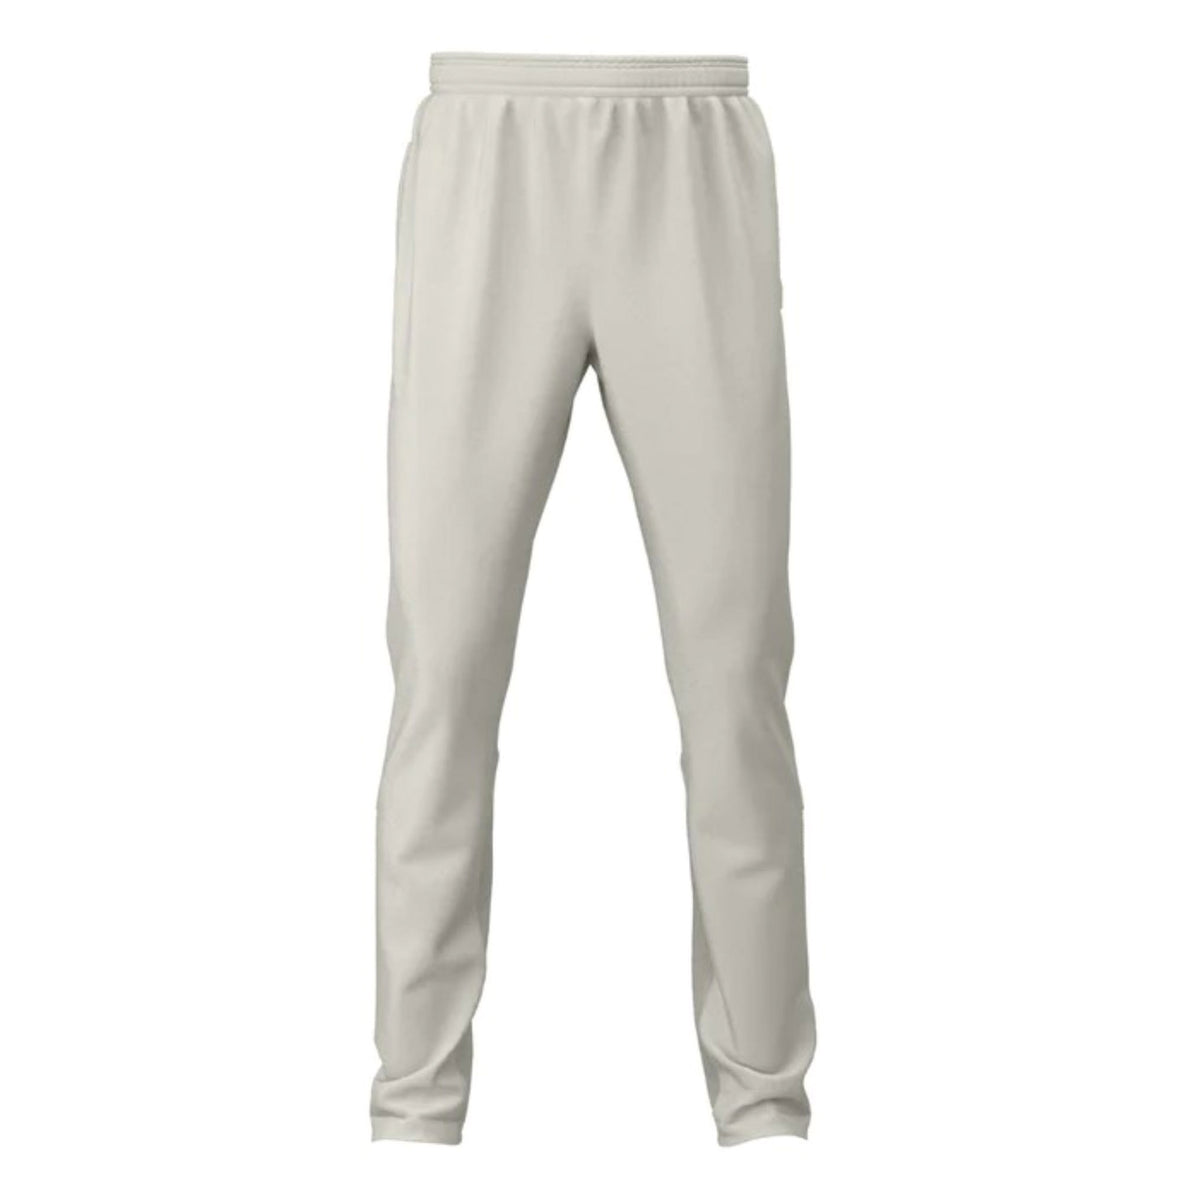 Radial Cricket Trousers